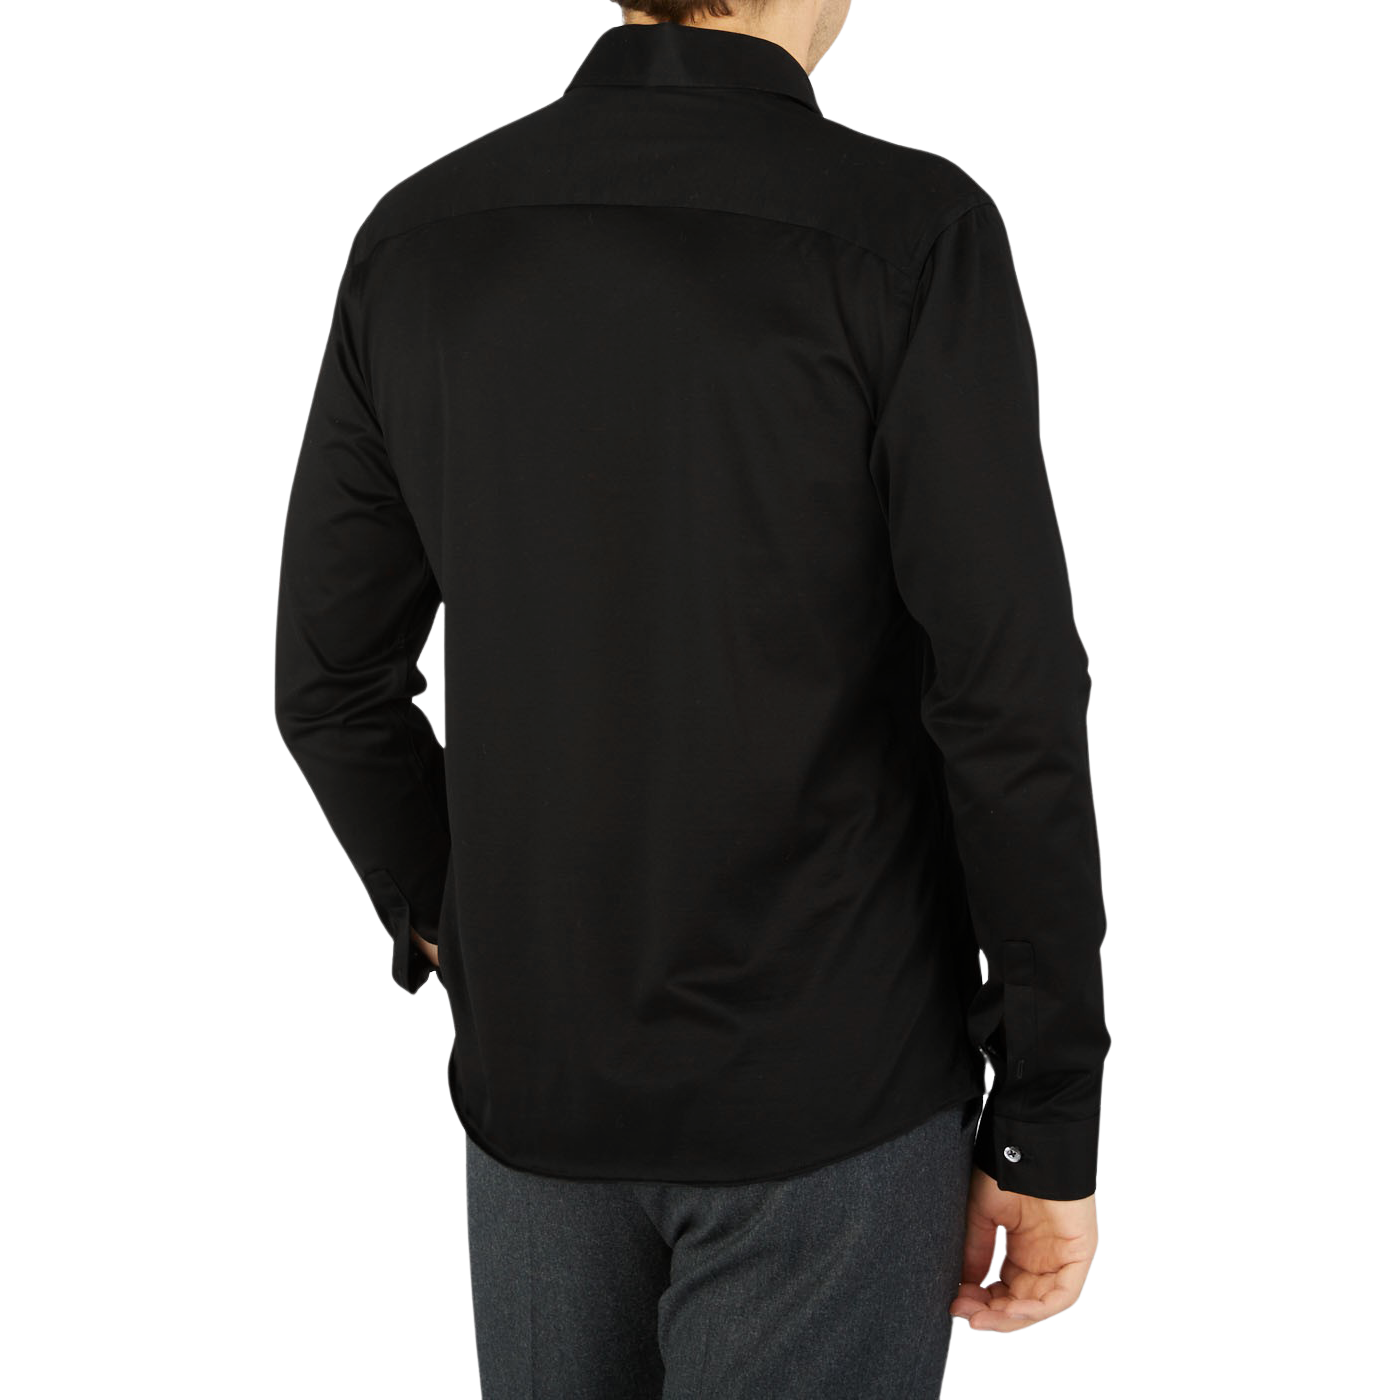 The back view of a contemporary man wearing a black Canali Black Cotton Jersey Casual Shirt.